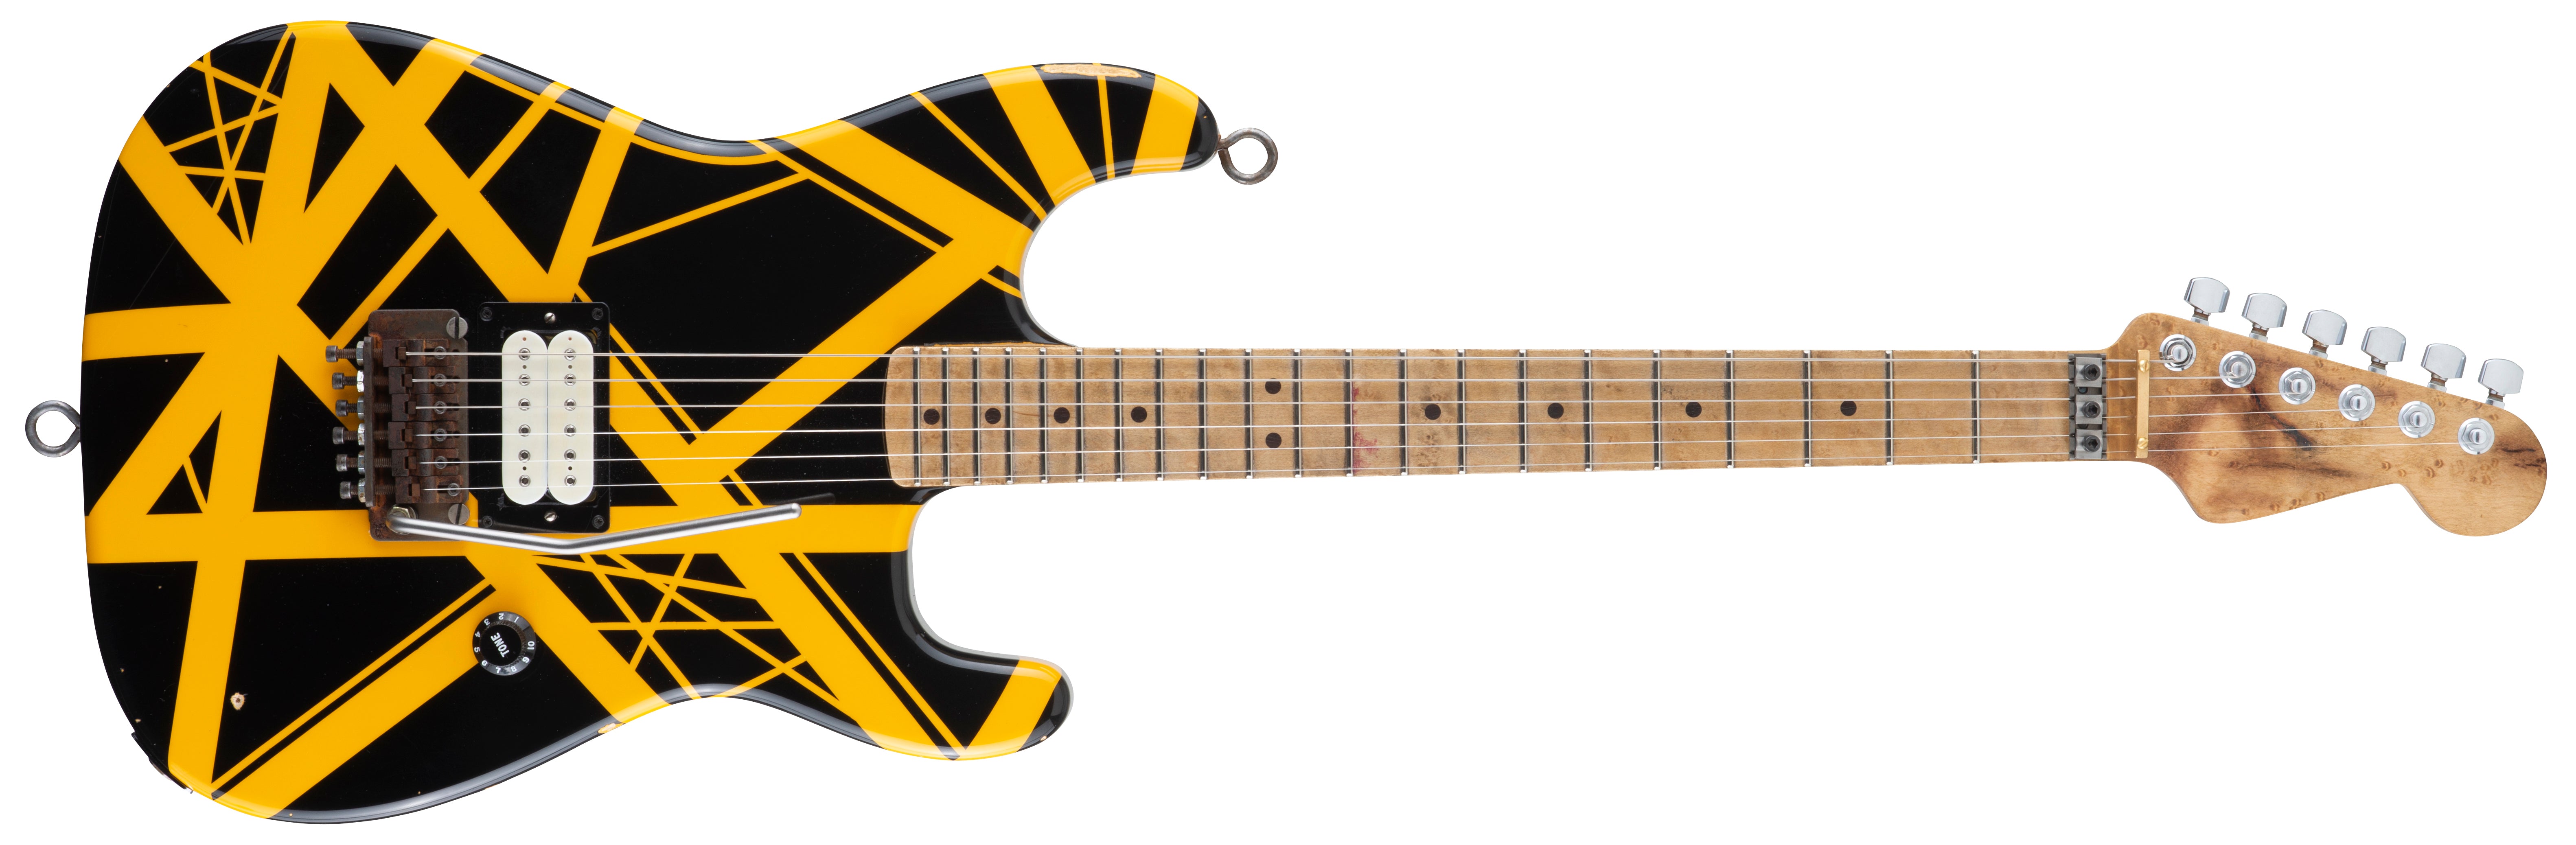 EVH 79 Tribute Relic Bumblebee - Black with Yellow Stripes